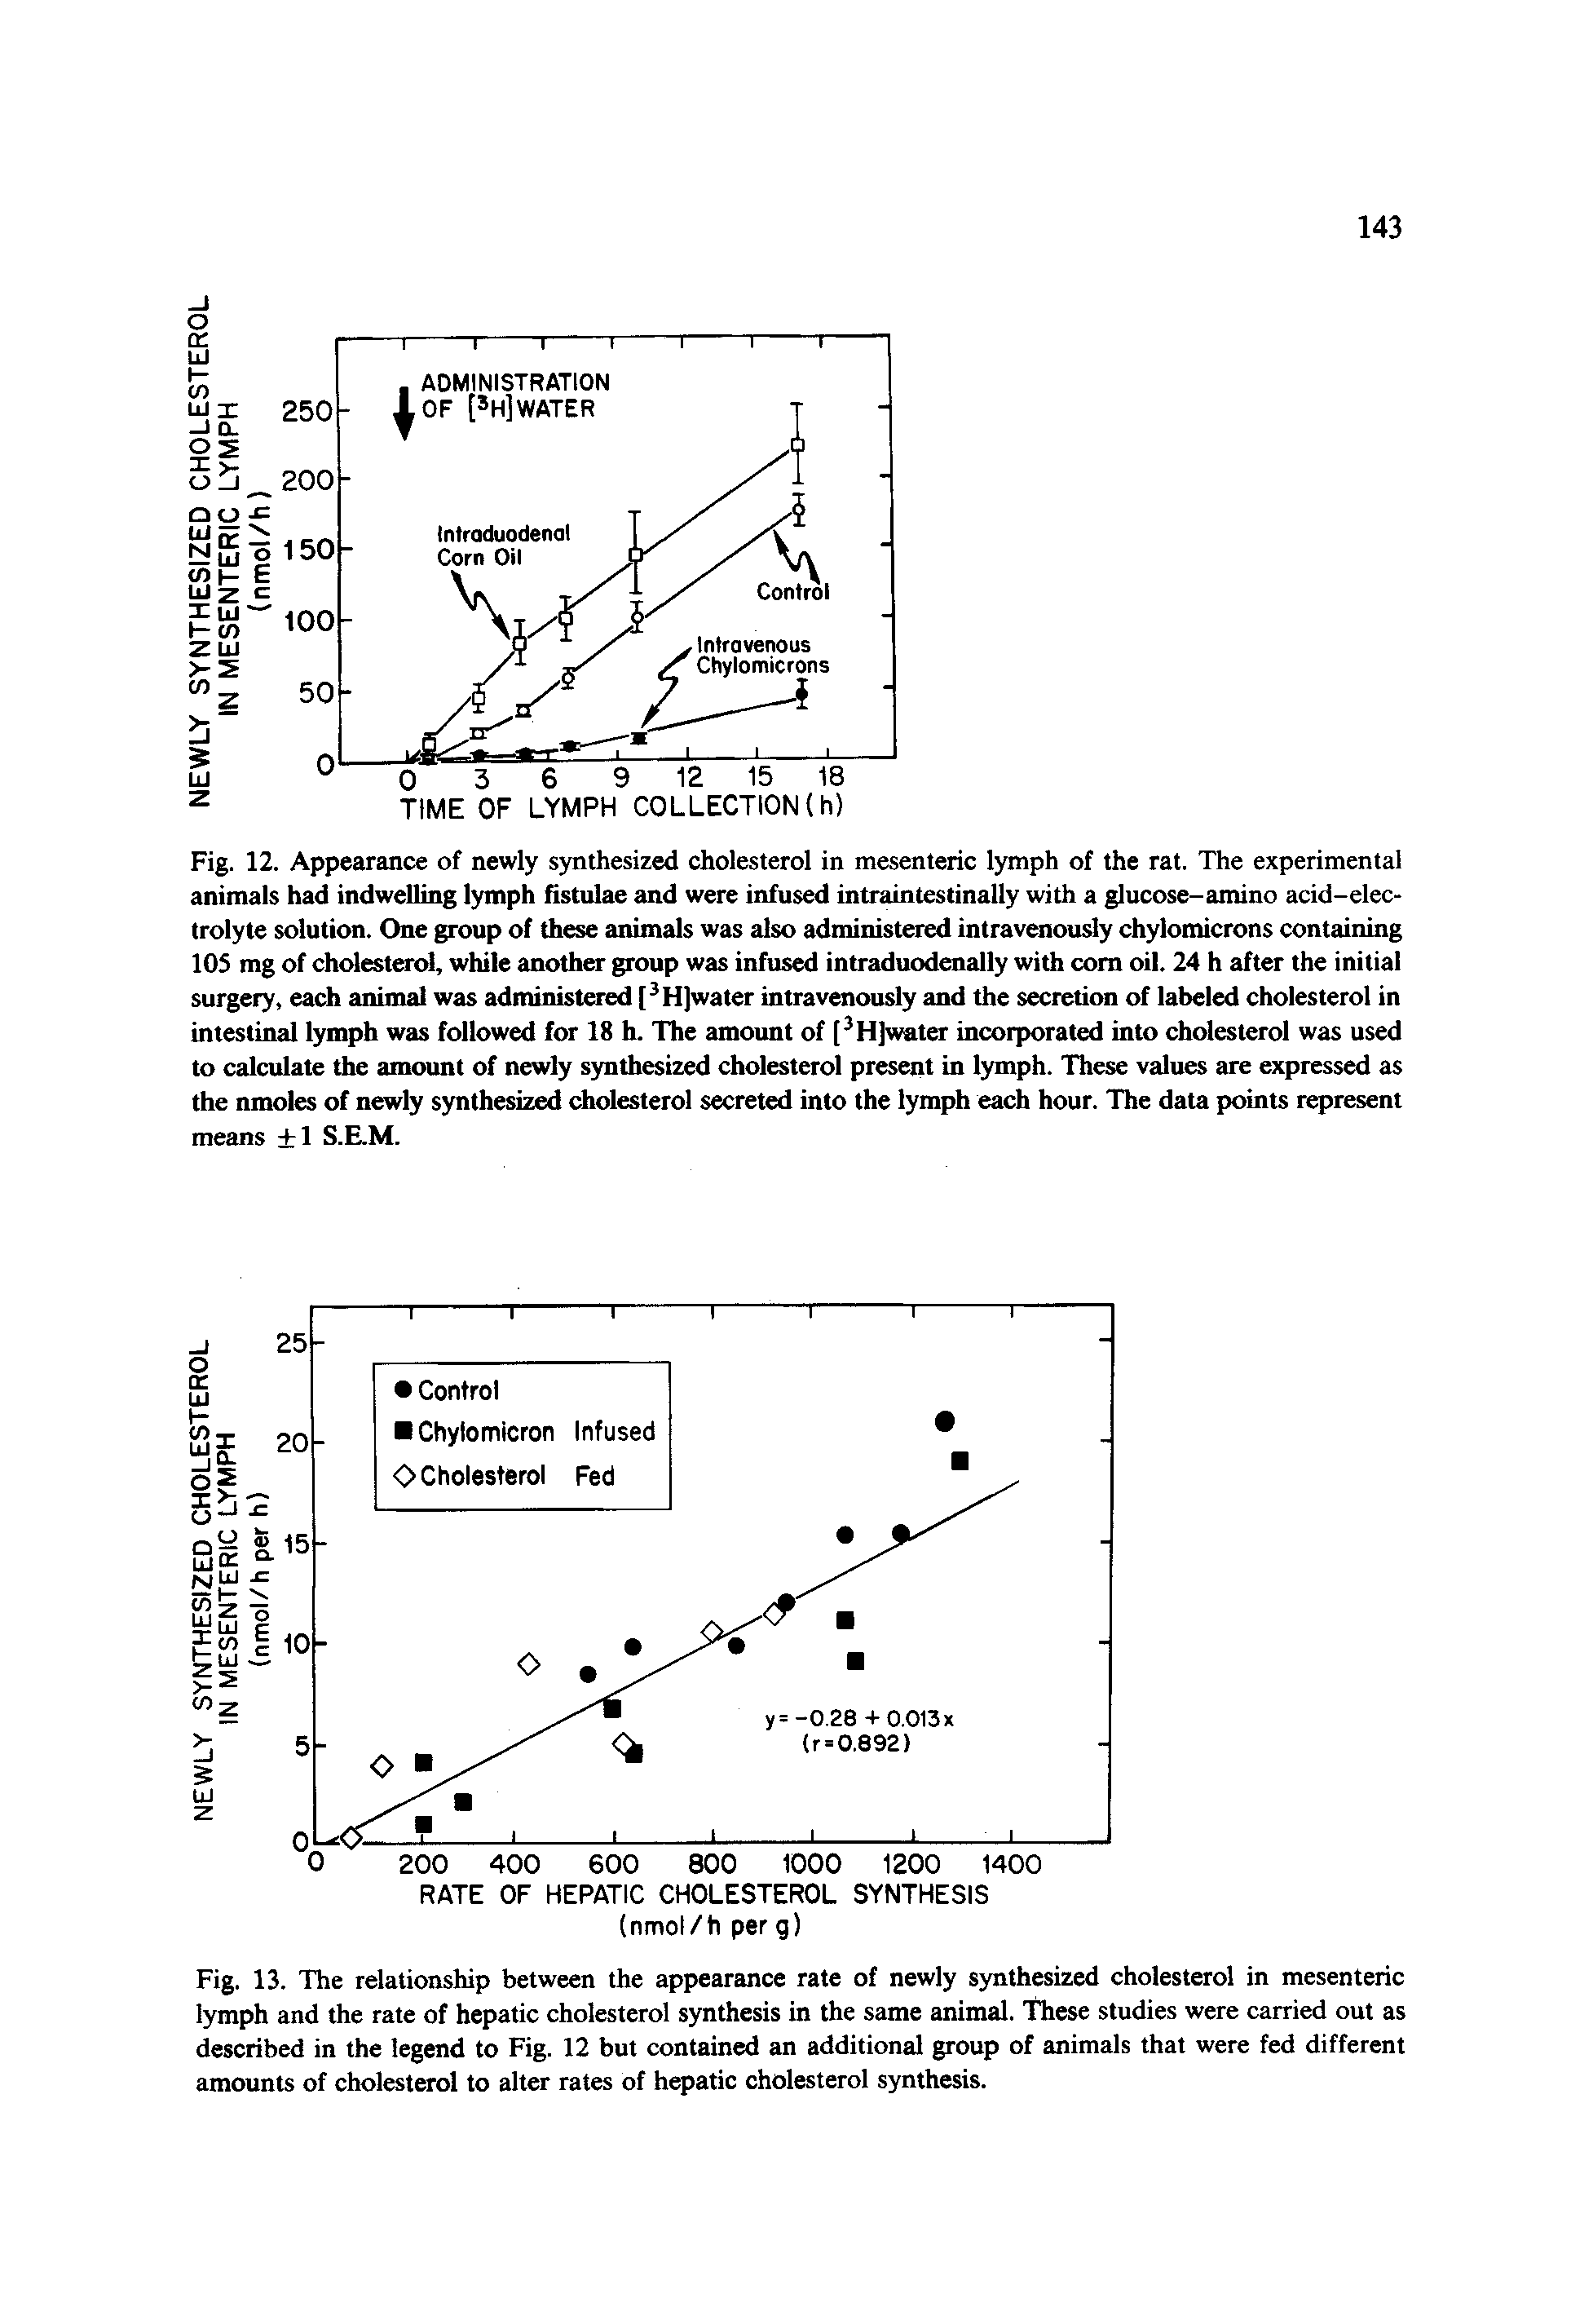 Fig. 12. Appearance of newly synthesized cholesterol in mesenteric lymph of the rat. The experimental animals had indwelling lymph fistulae and were infused intraintestinally with a glucose-amino acid-electrolyte solution. One group of these animals was also administered intravenously chylomicrons containing lOS mg of cholesterol, while another group was infused intraduodenally with com oil. 24 h after the initial surgery, each animal was administered [ H]water intravenously and the secretion of labeled cholesterol in intestinal lymph was followed for 18 h. The amount of [ HJwater incorporated into cholesterol was used to calculate the amount of newly synthesized cholesterol present in lymph. These values are expressed as the nmoles of newly synthesized cholesterol secreted into the lymph each hour. The data points represent means +1 S.E.M.